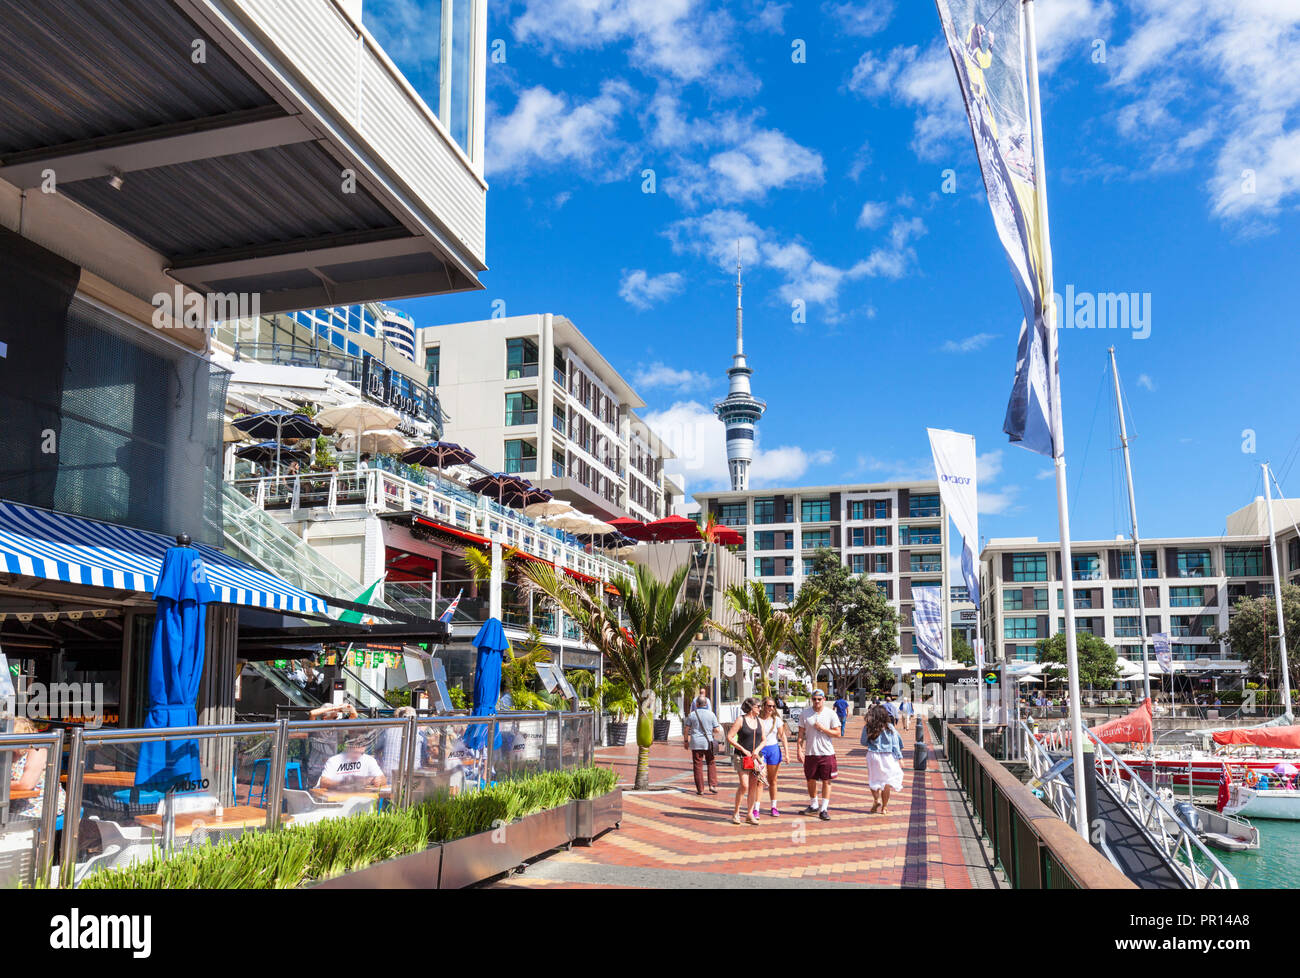 Restaurants and bars in waterfront area, Viaduct Harbour, Auckland, North Island, New Zealand, Pacific Stock Photo